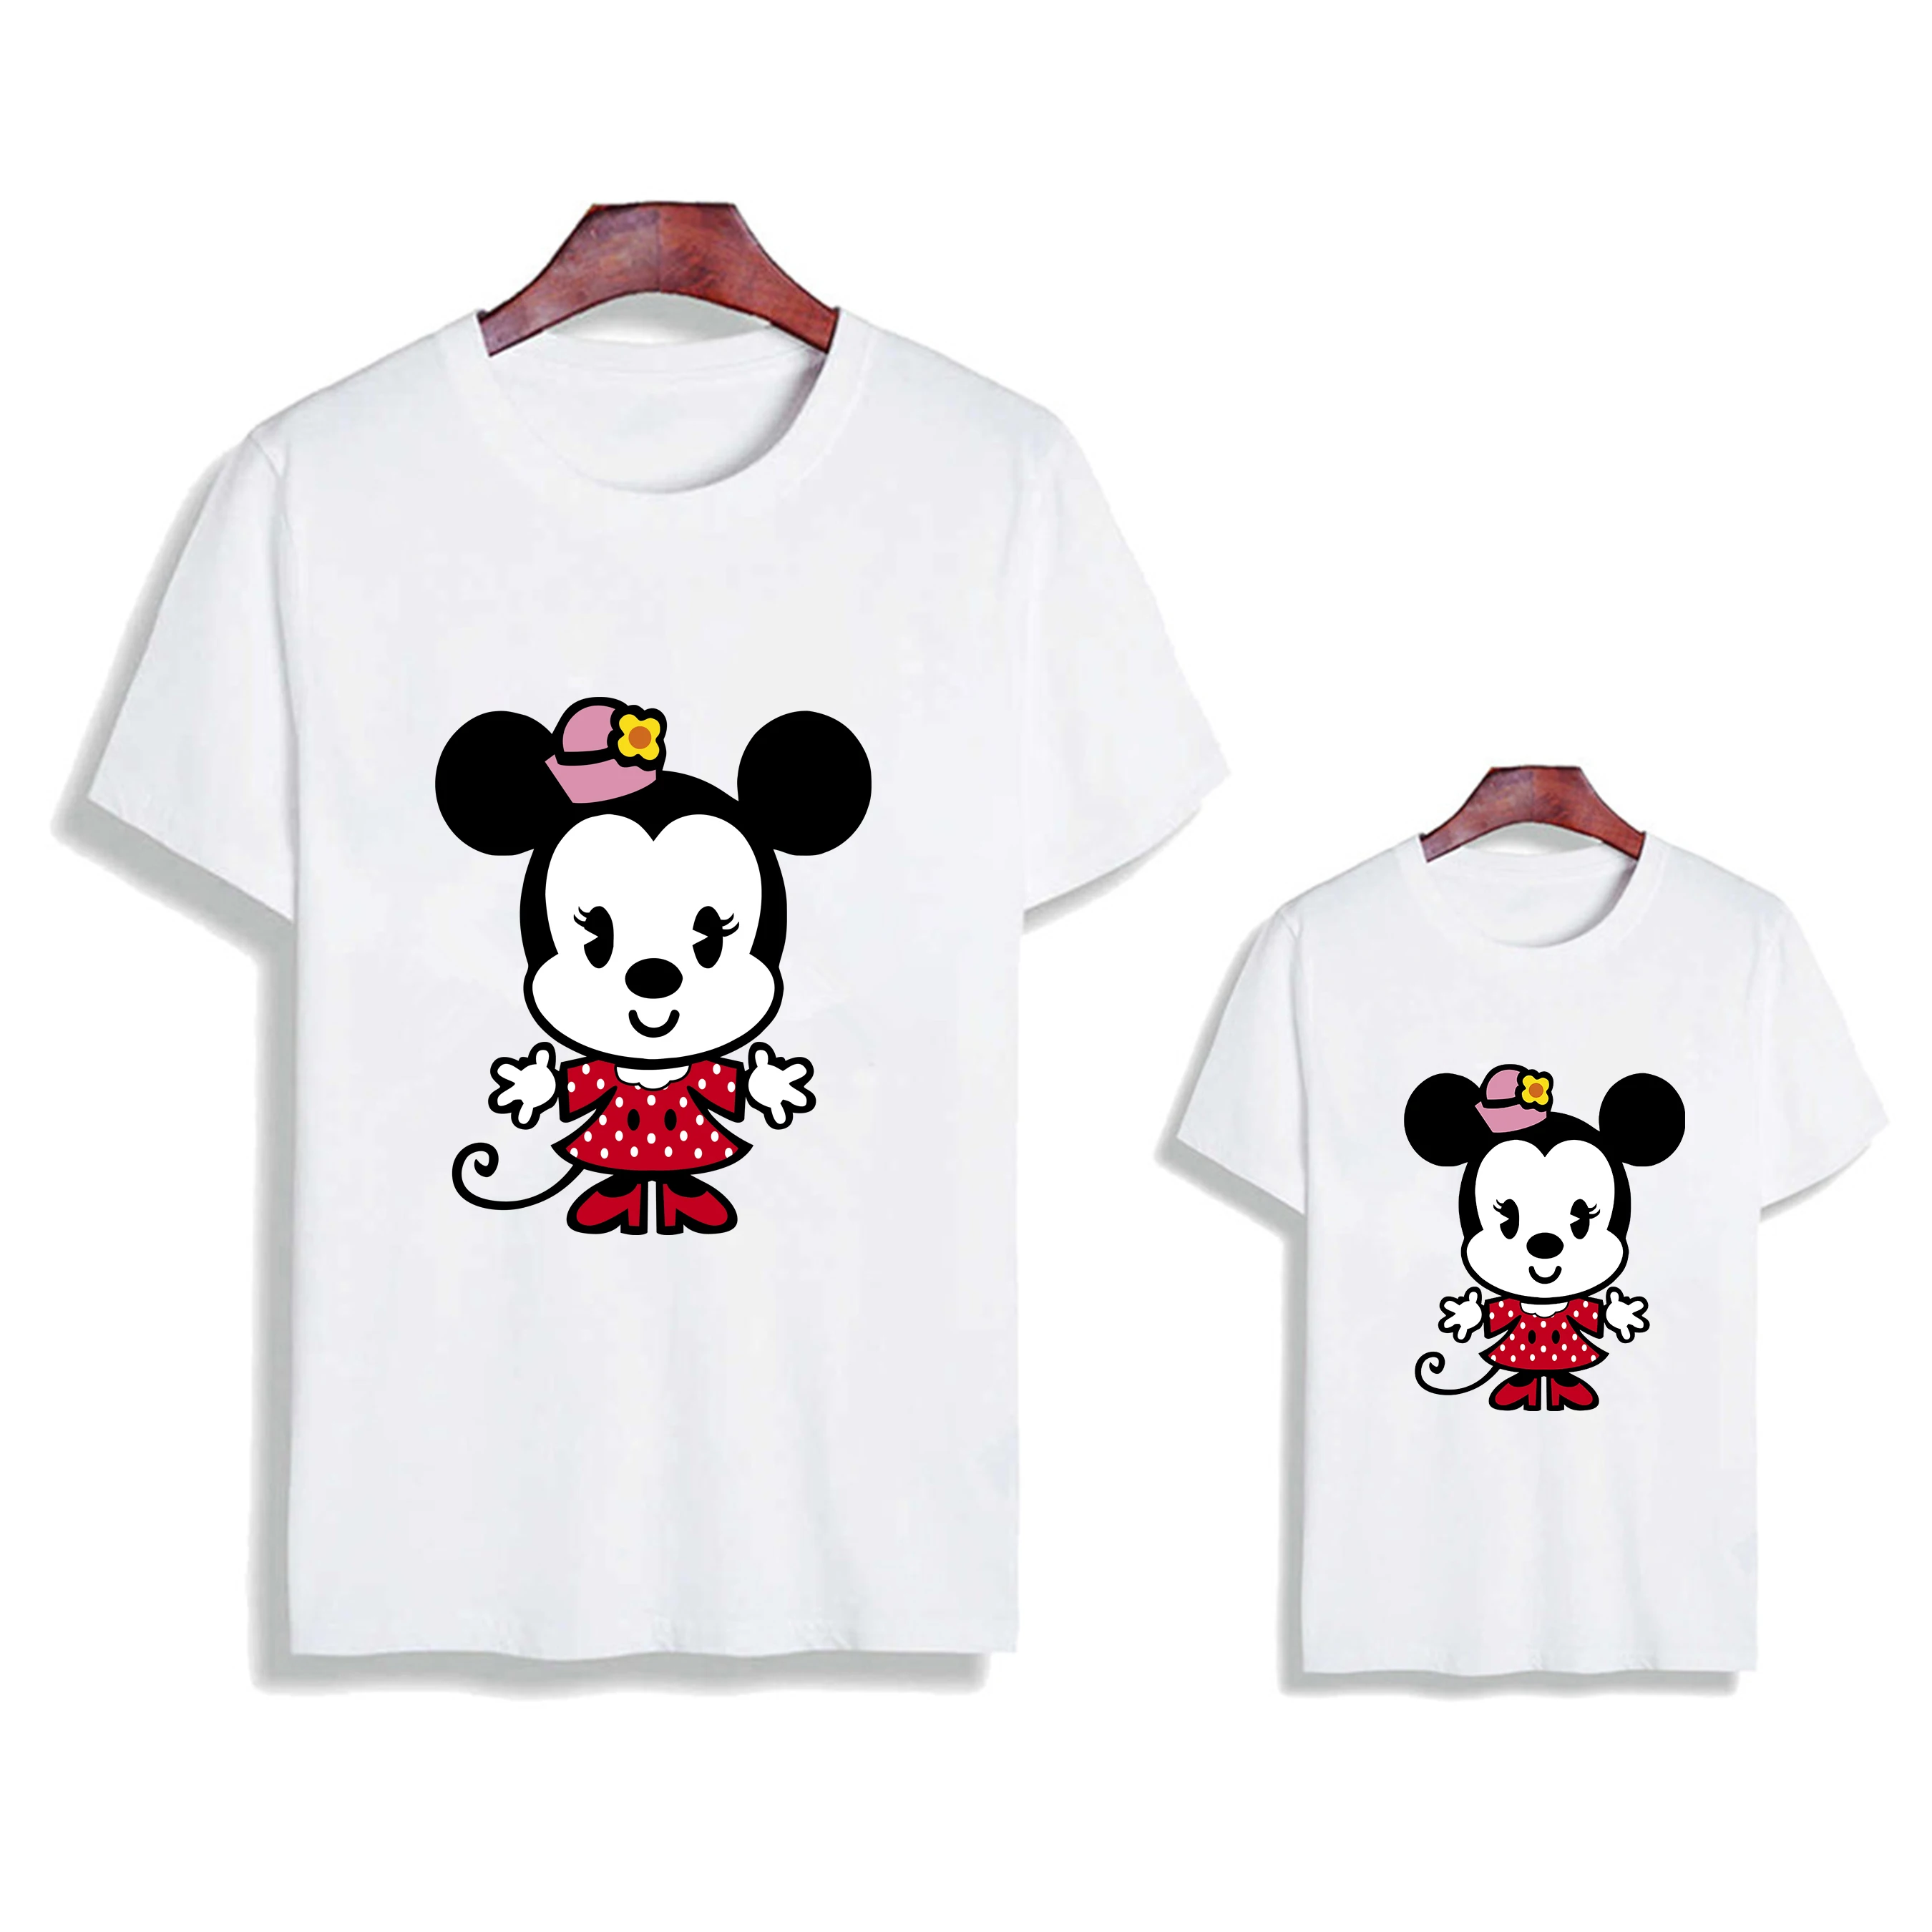 Matching Mother Daughter Shirts Mom and daughter Disney Shirts Minnie Mouse Mom and daughter Shirts Minnie and Minnie Me Shirts Kleding Meisjeskleding Tops & T-shirts 